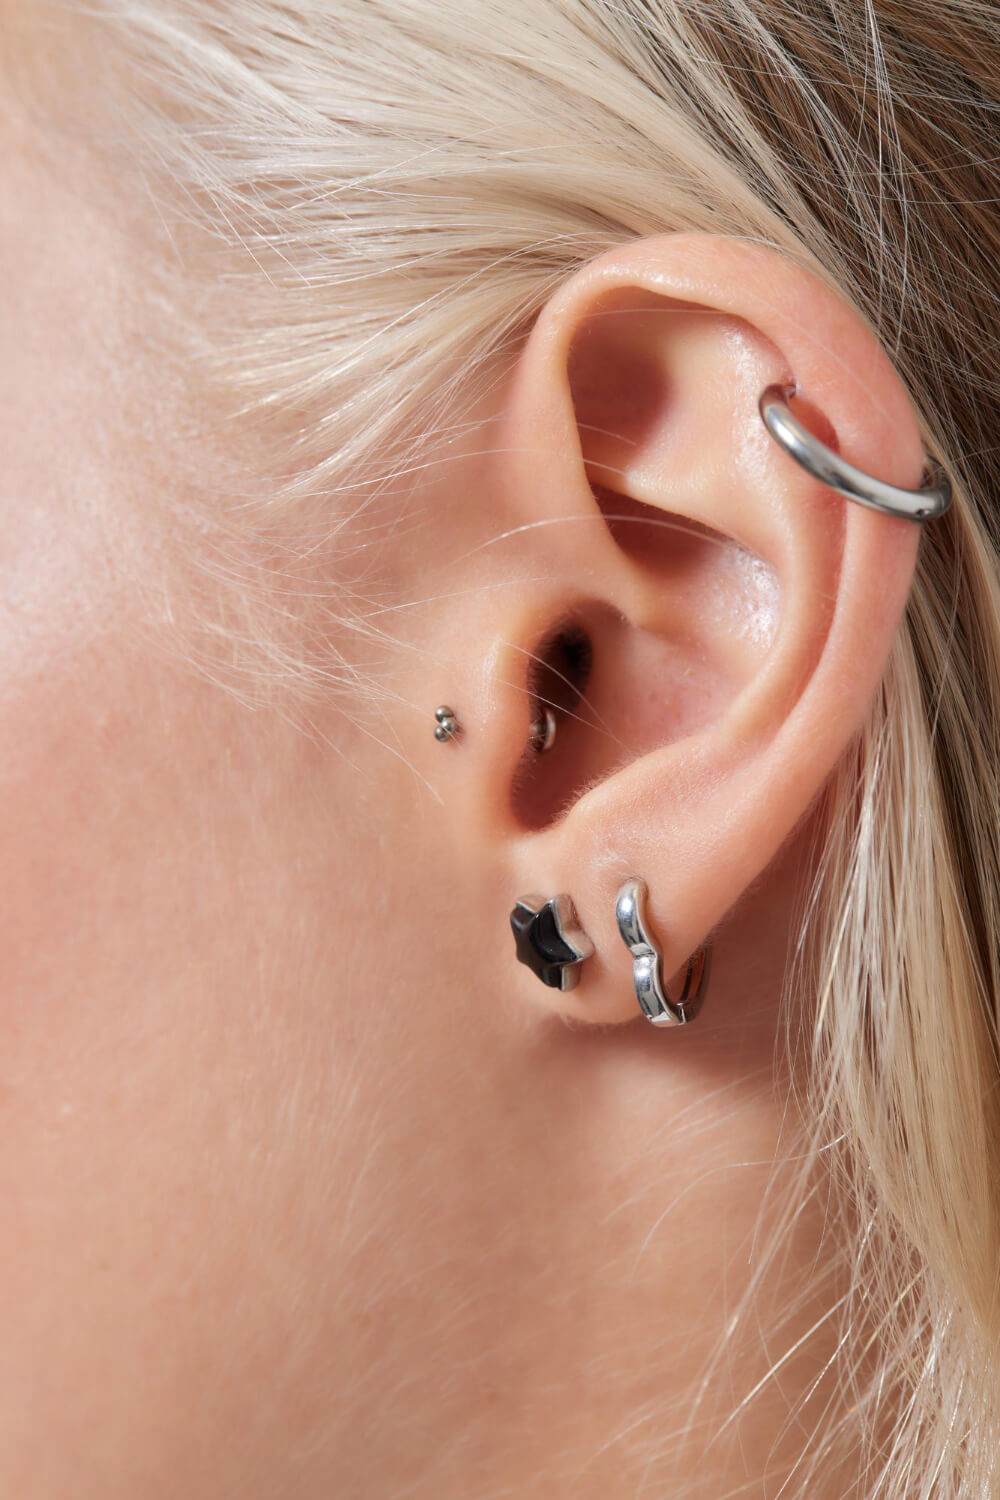 woman's ear with 4 earrings placed by a professional piercing expert